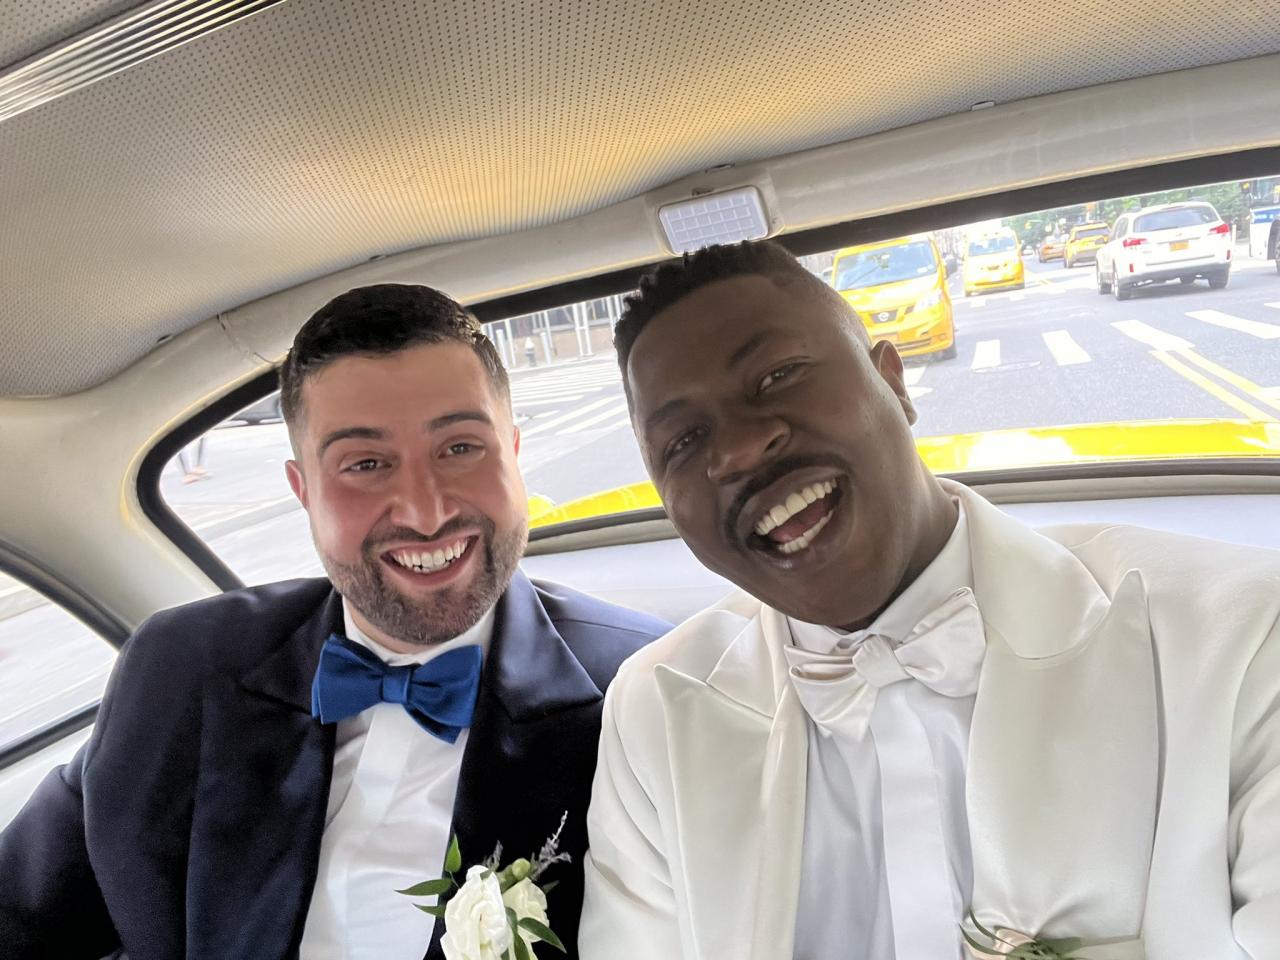 Nigerian gay rights activist, Edafe Okporo and his lover, Nick Giglio get married 